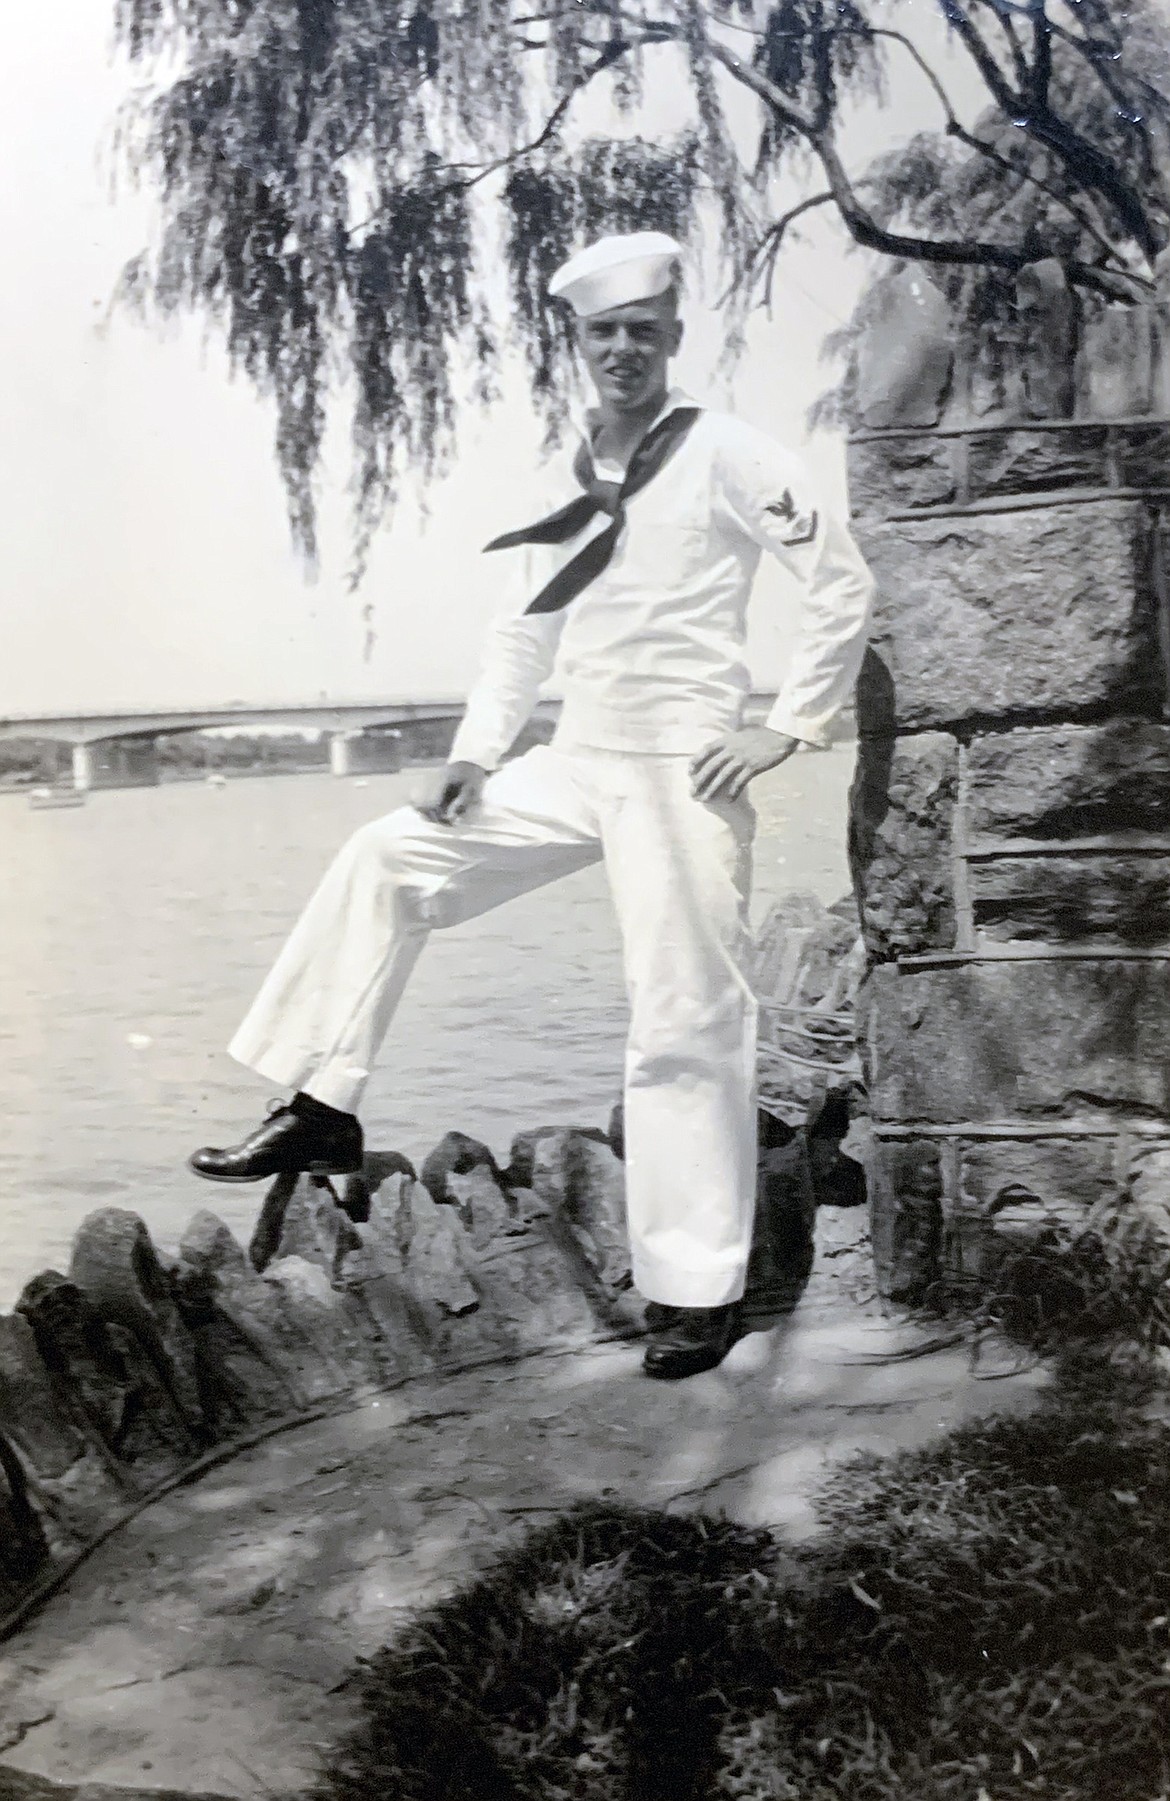 At age 19, Arnold Peterson joined the navy and served as a chief radio technician aboard a destroyer in the Pacific during World War II. (photo provided)